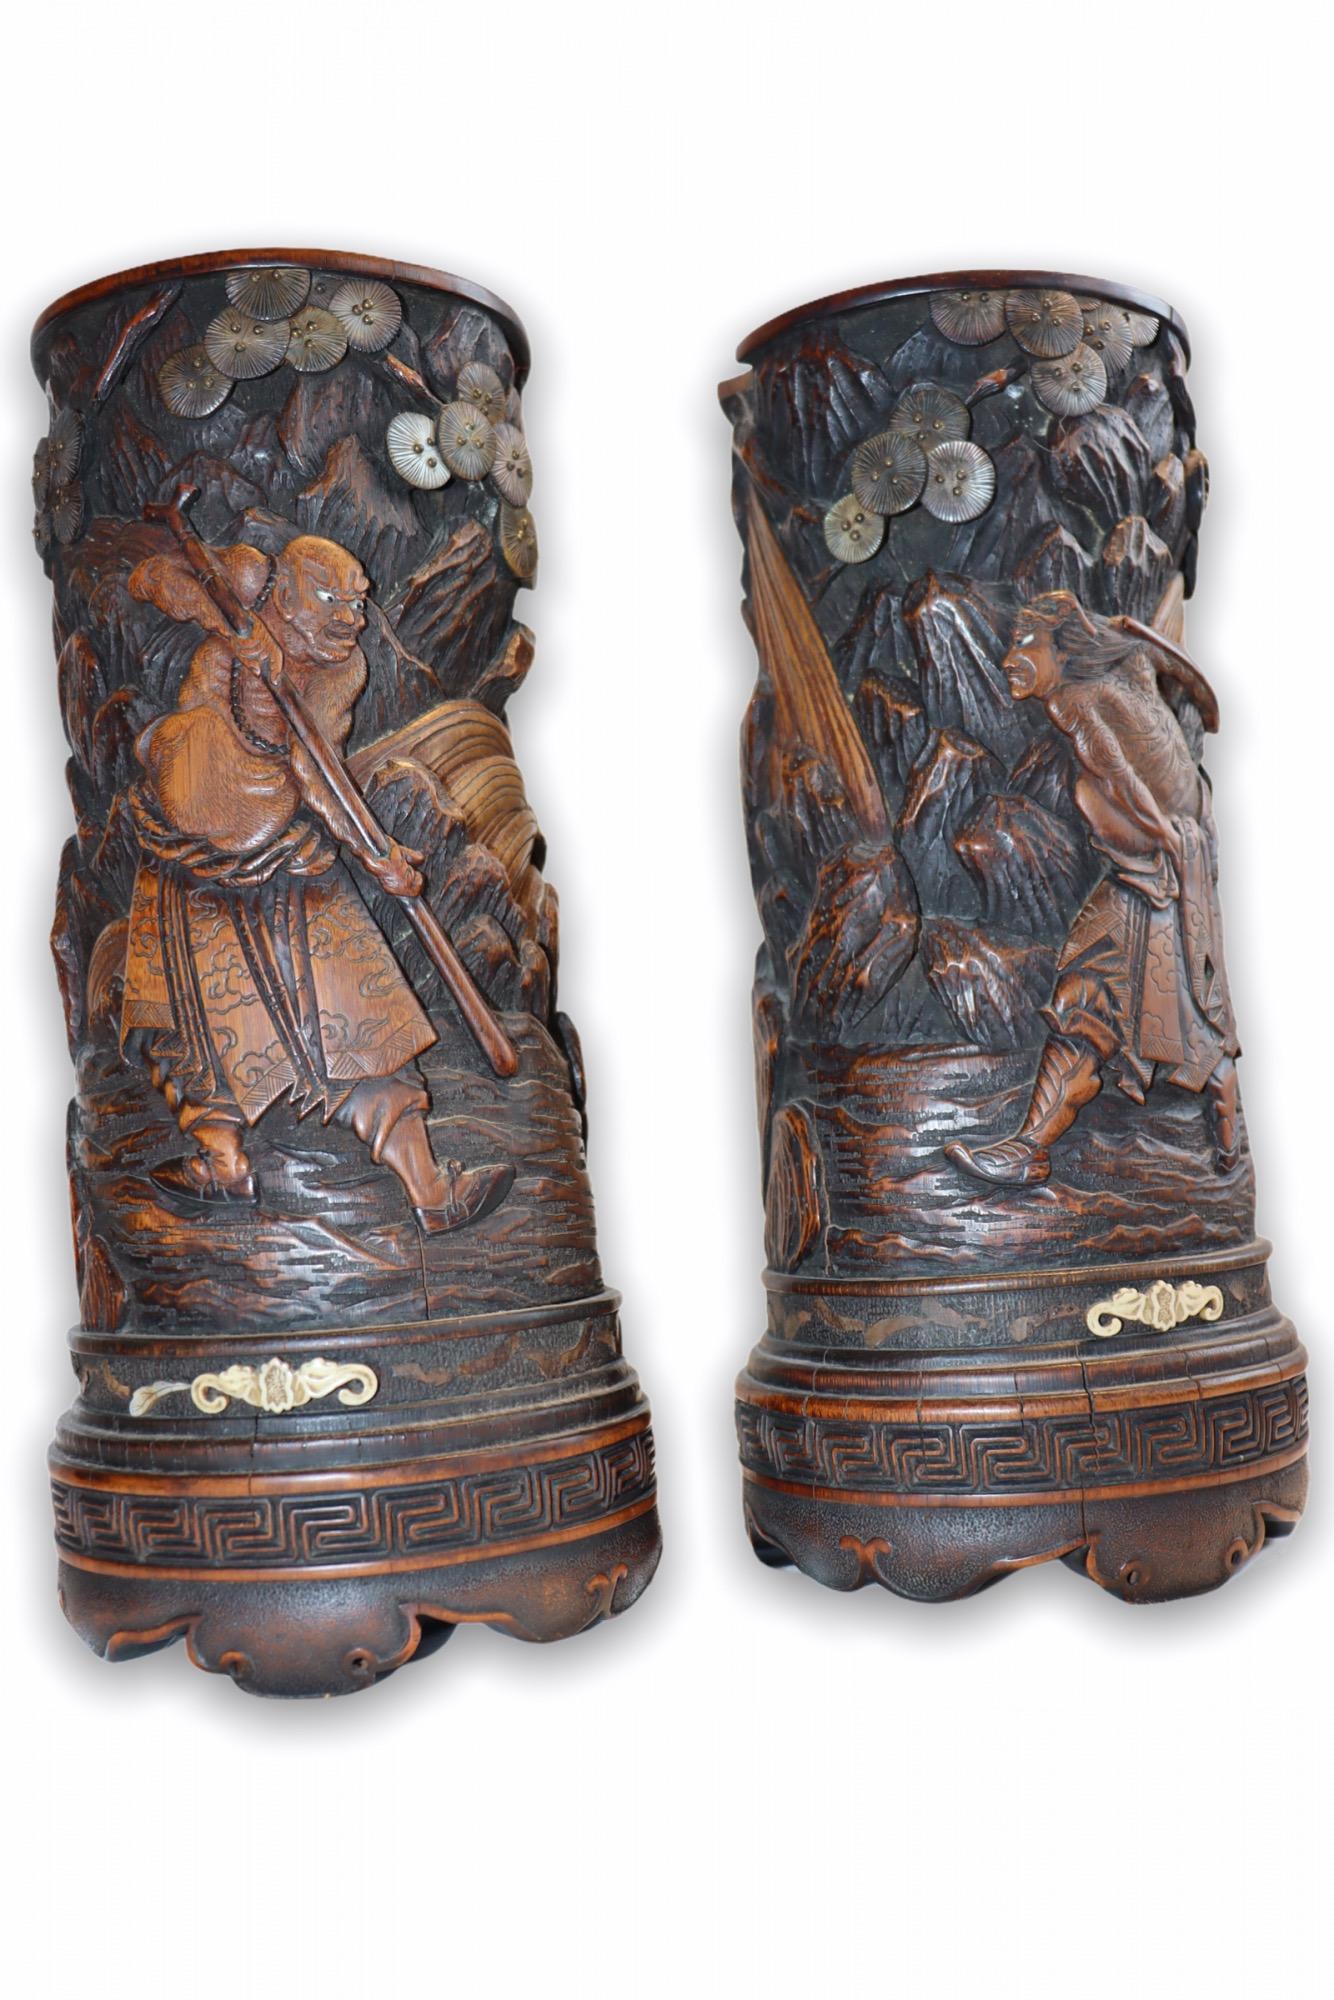 Monumental Pair of Chinese Carved Wood Brush Pots, Late 18th Century For Sale 4